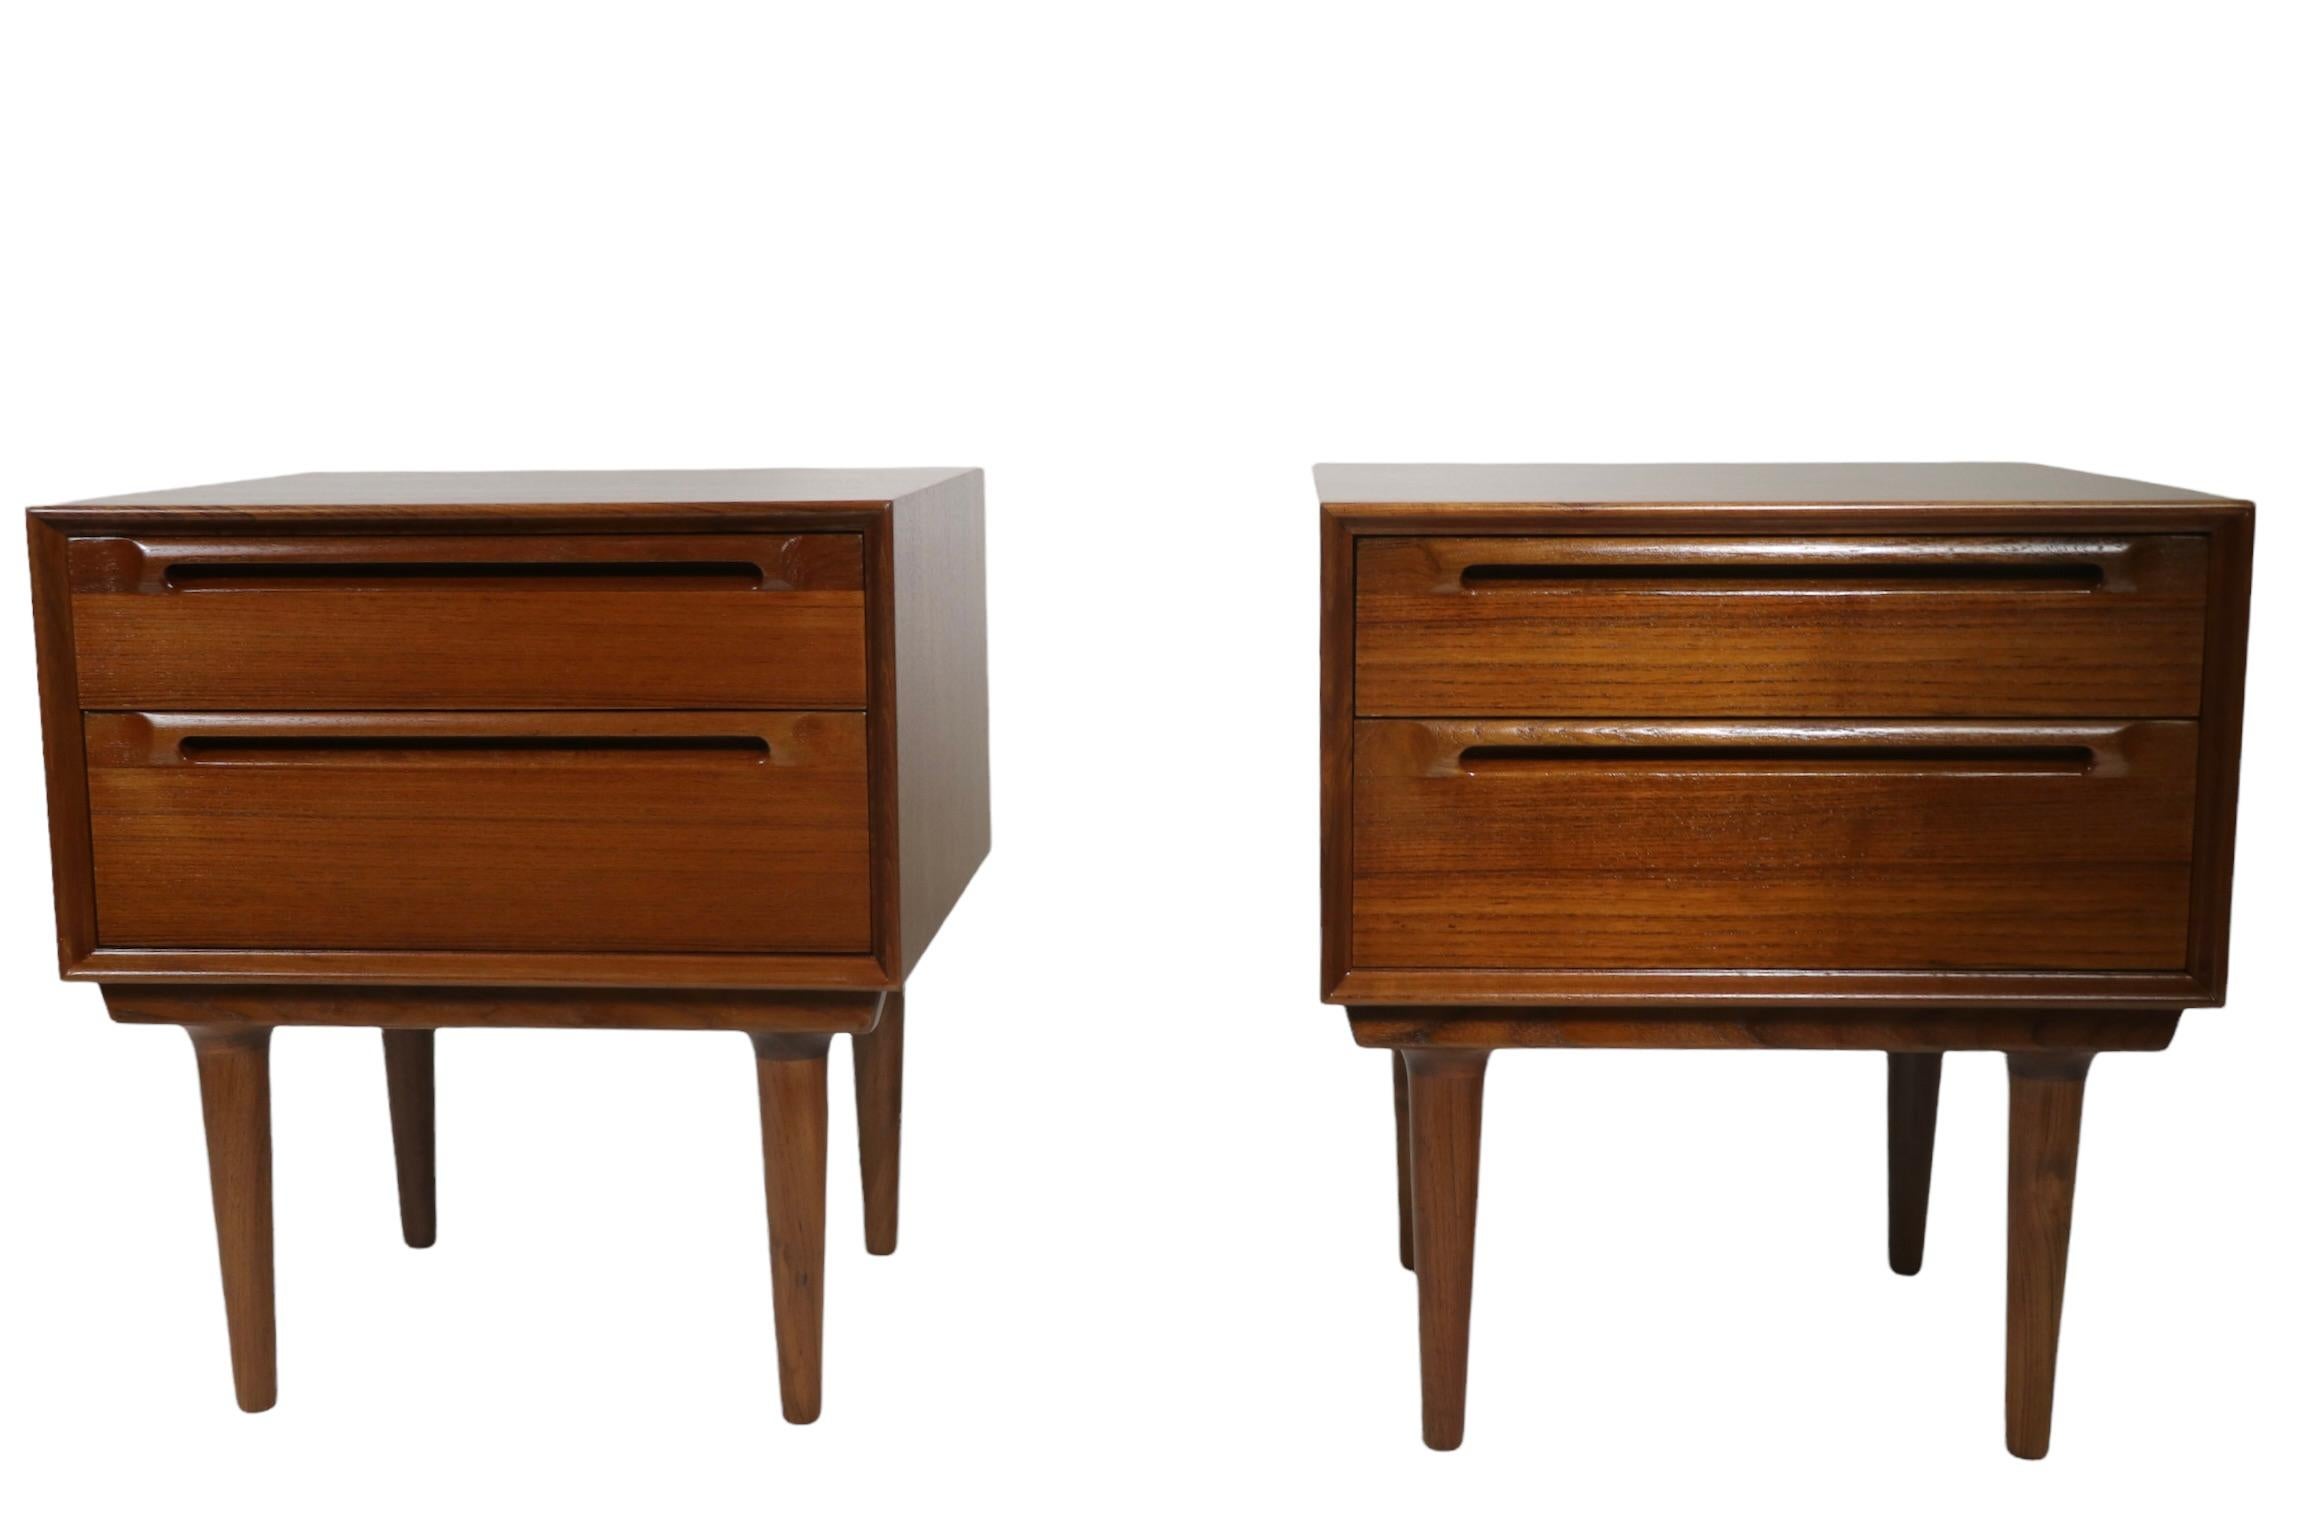 Pr. Danish Mid-Century Modern Night Tables Att. to Sven Ellekaer In Excellent Condition For Sale In New York, NY